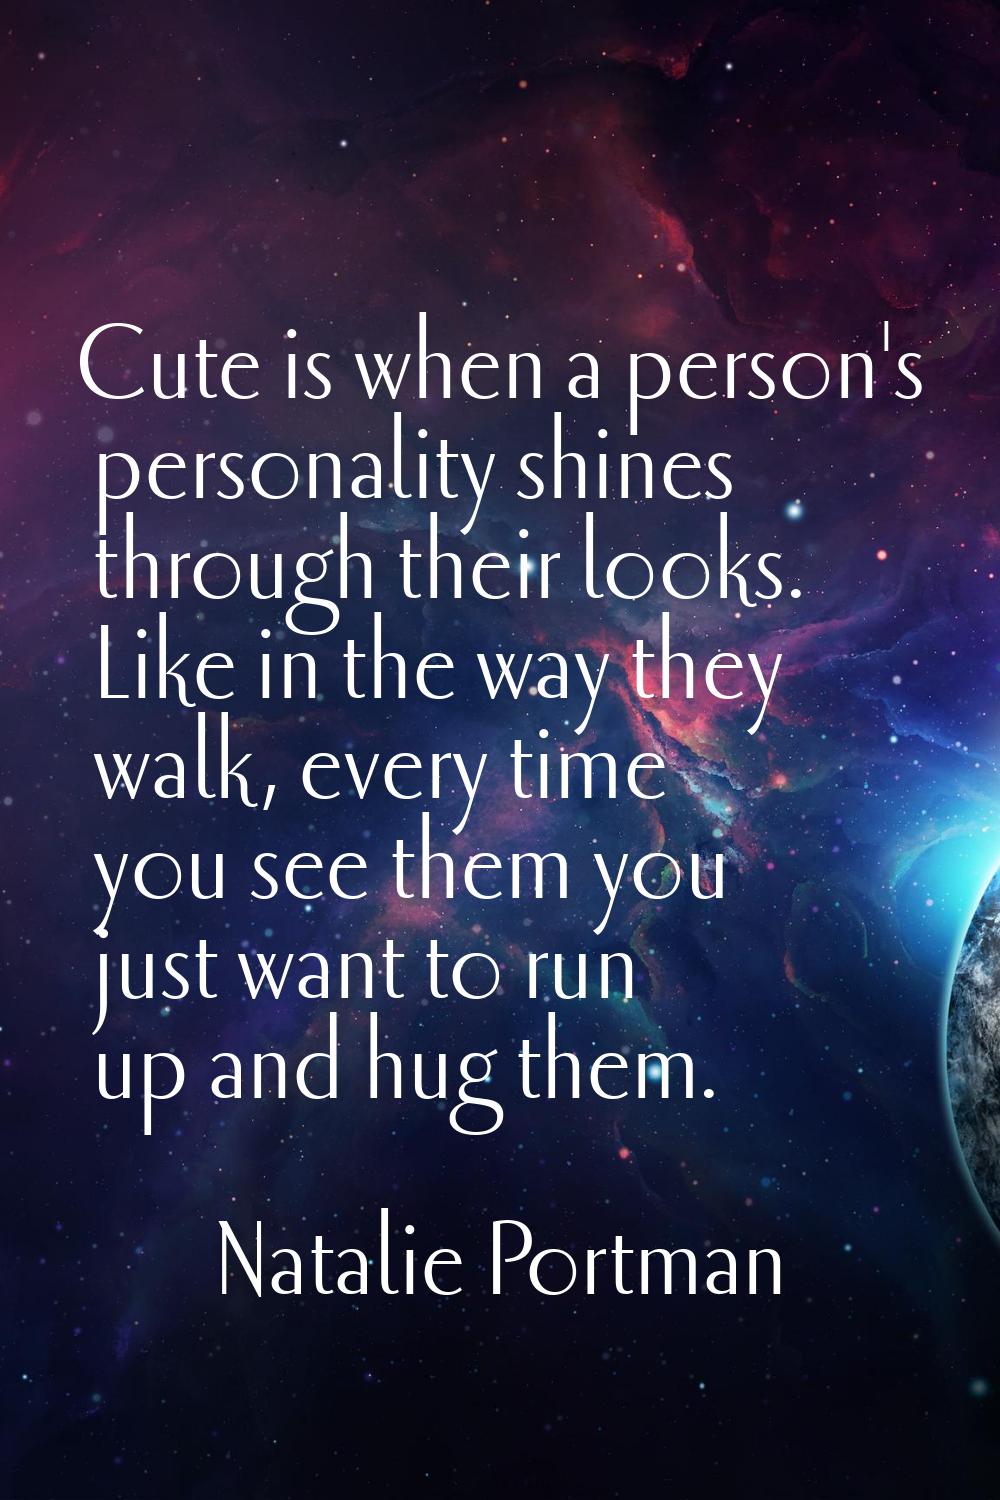 Cute is when a person's personality shines through their looks. Like in the way they walk, every ti